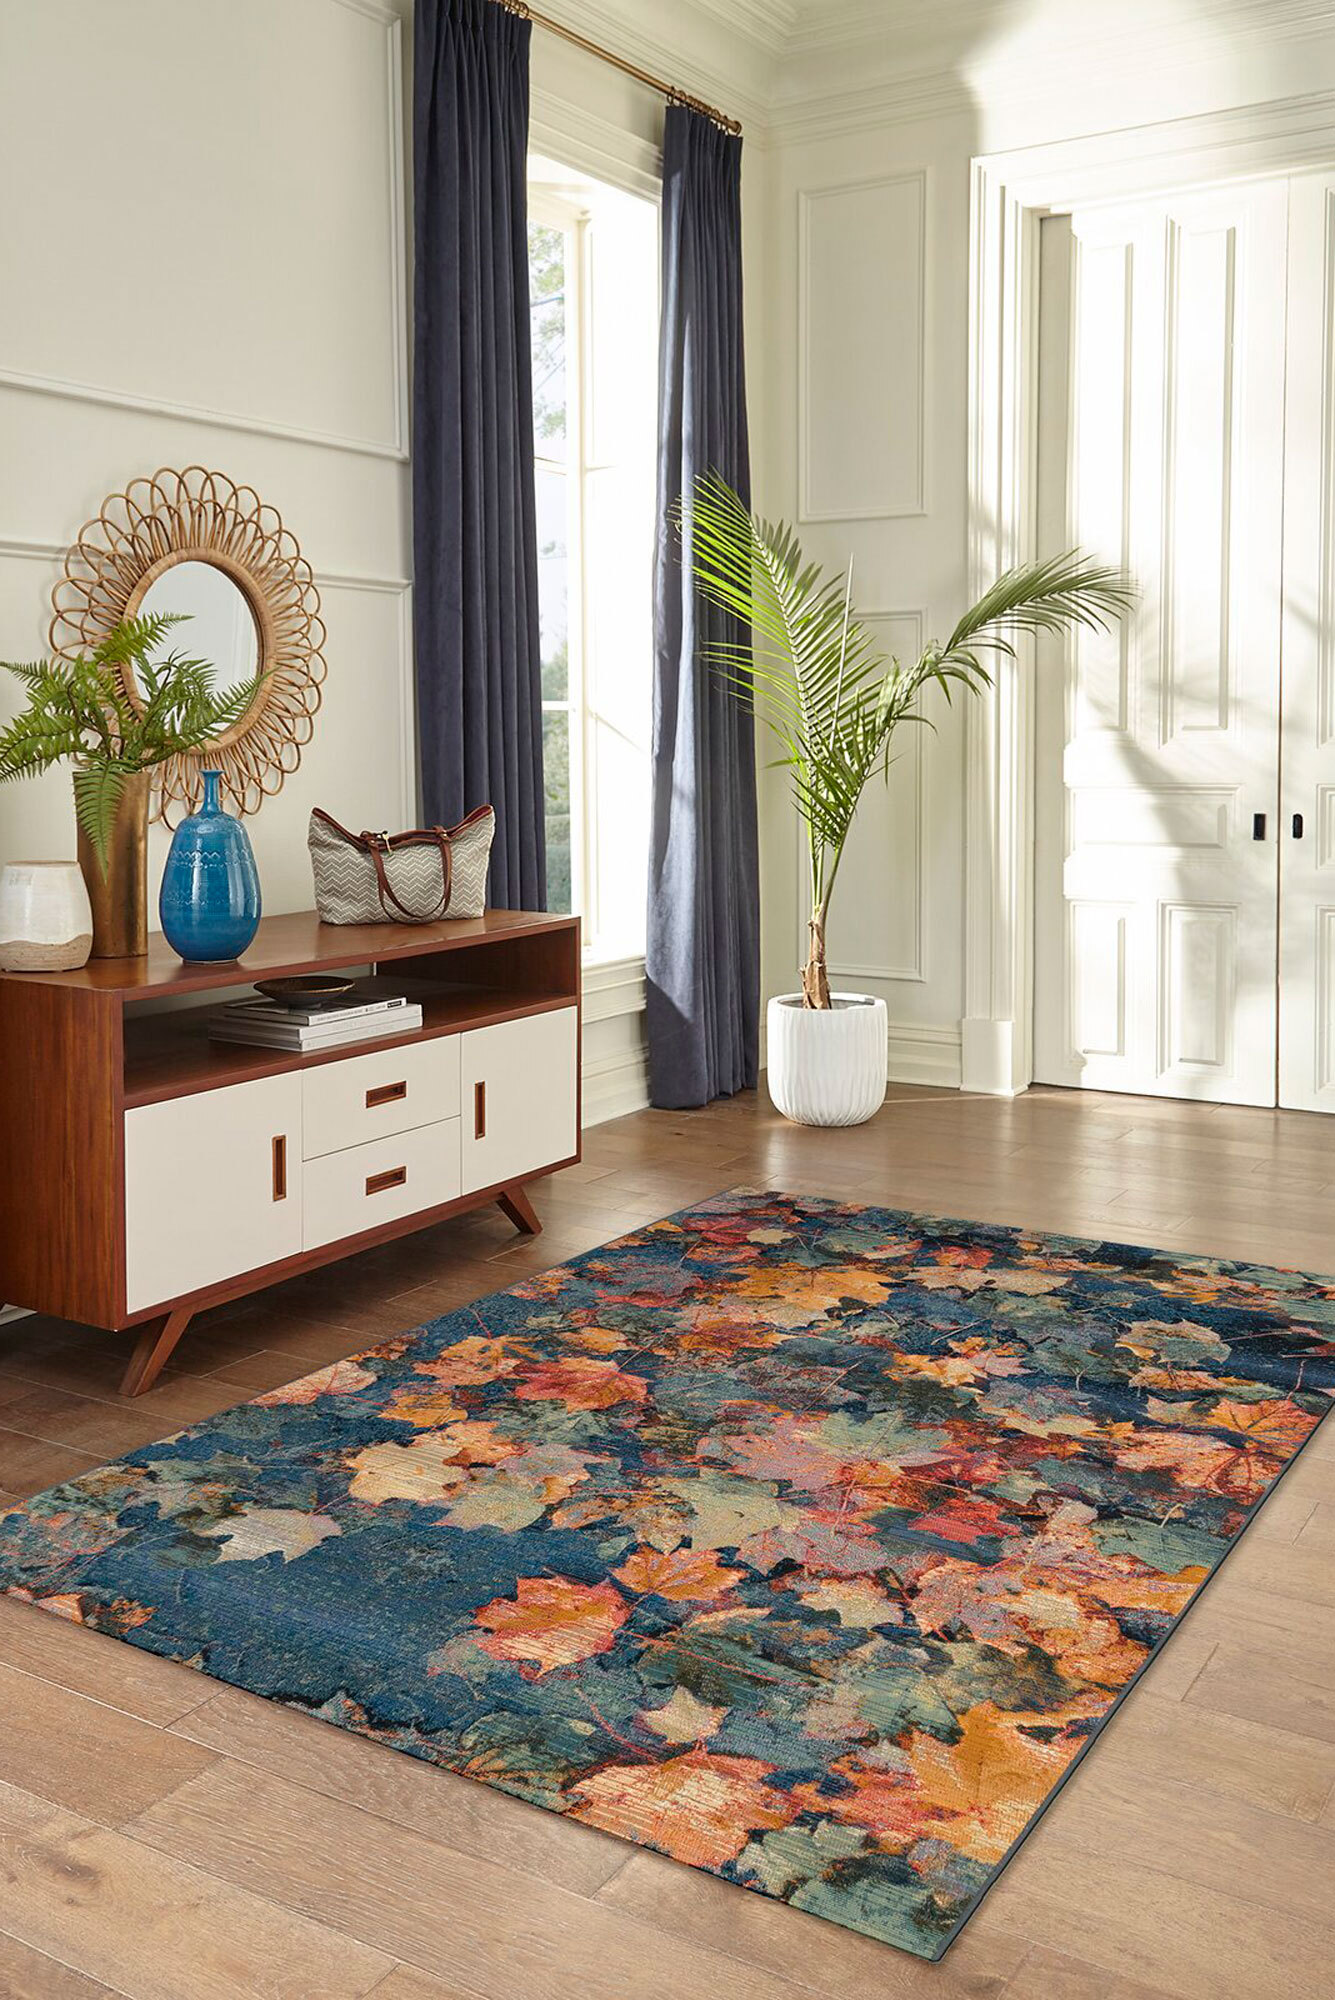 Aperto Floral Autumn Leaves Rug(Size 235 x 160cm)